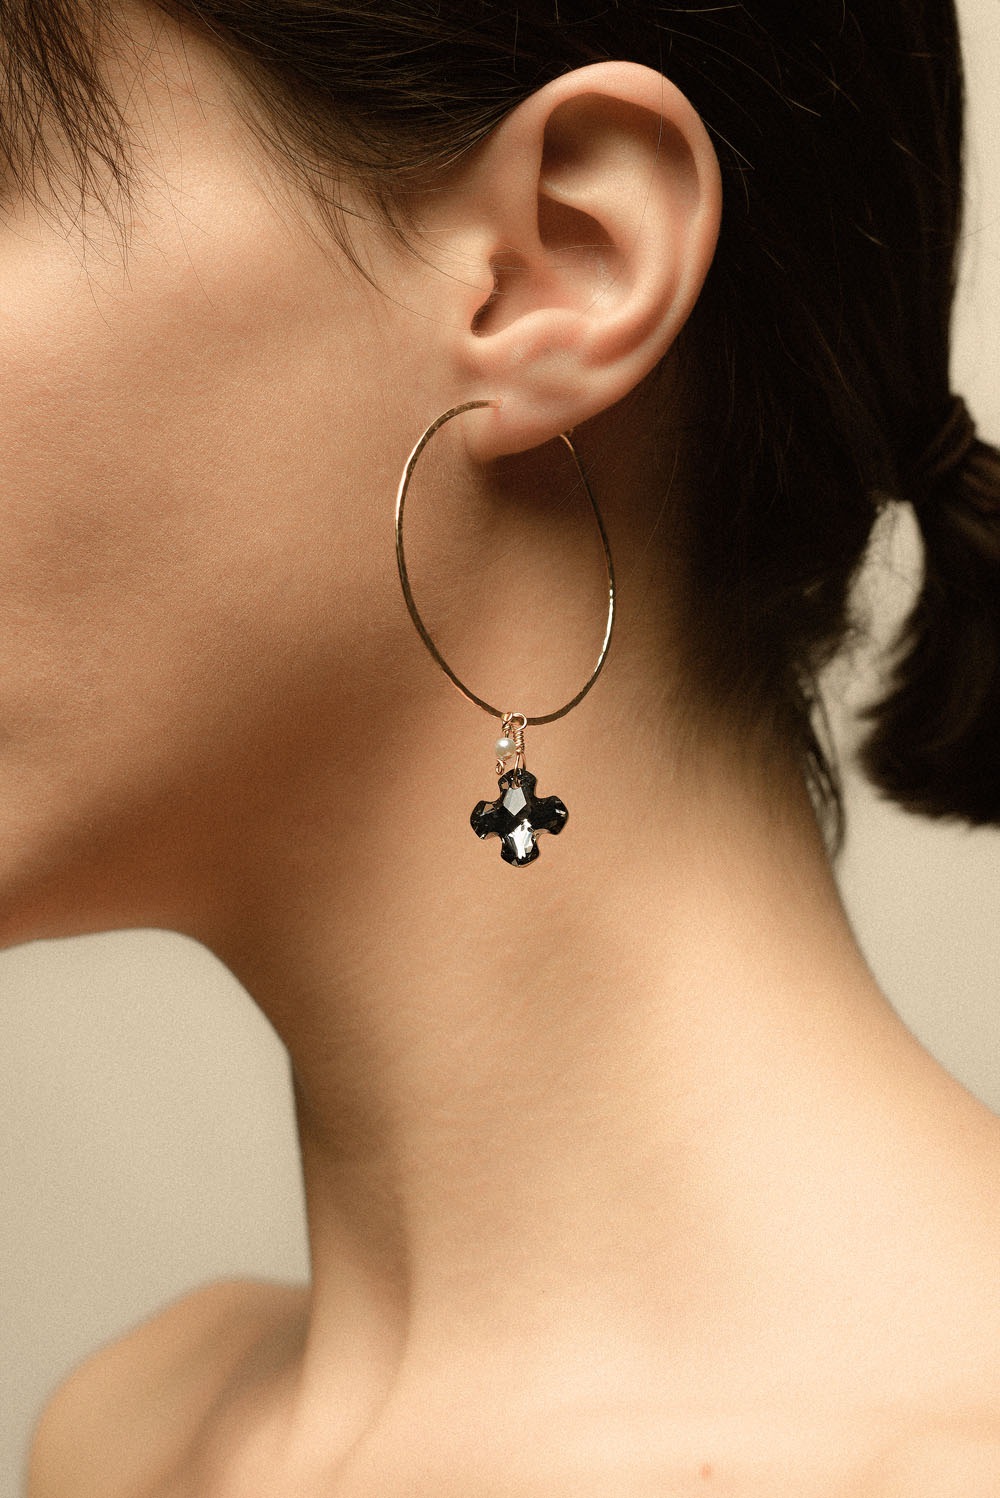 14k gold filled hoop earrings with black cross crystals and white pearls